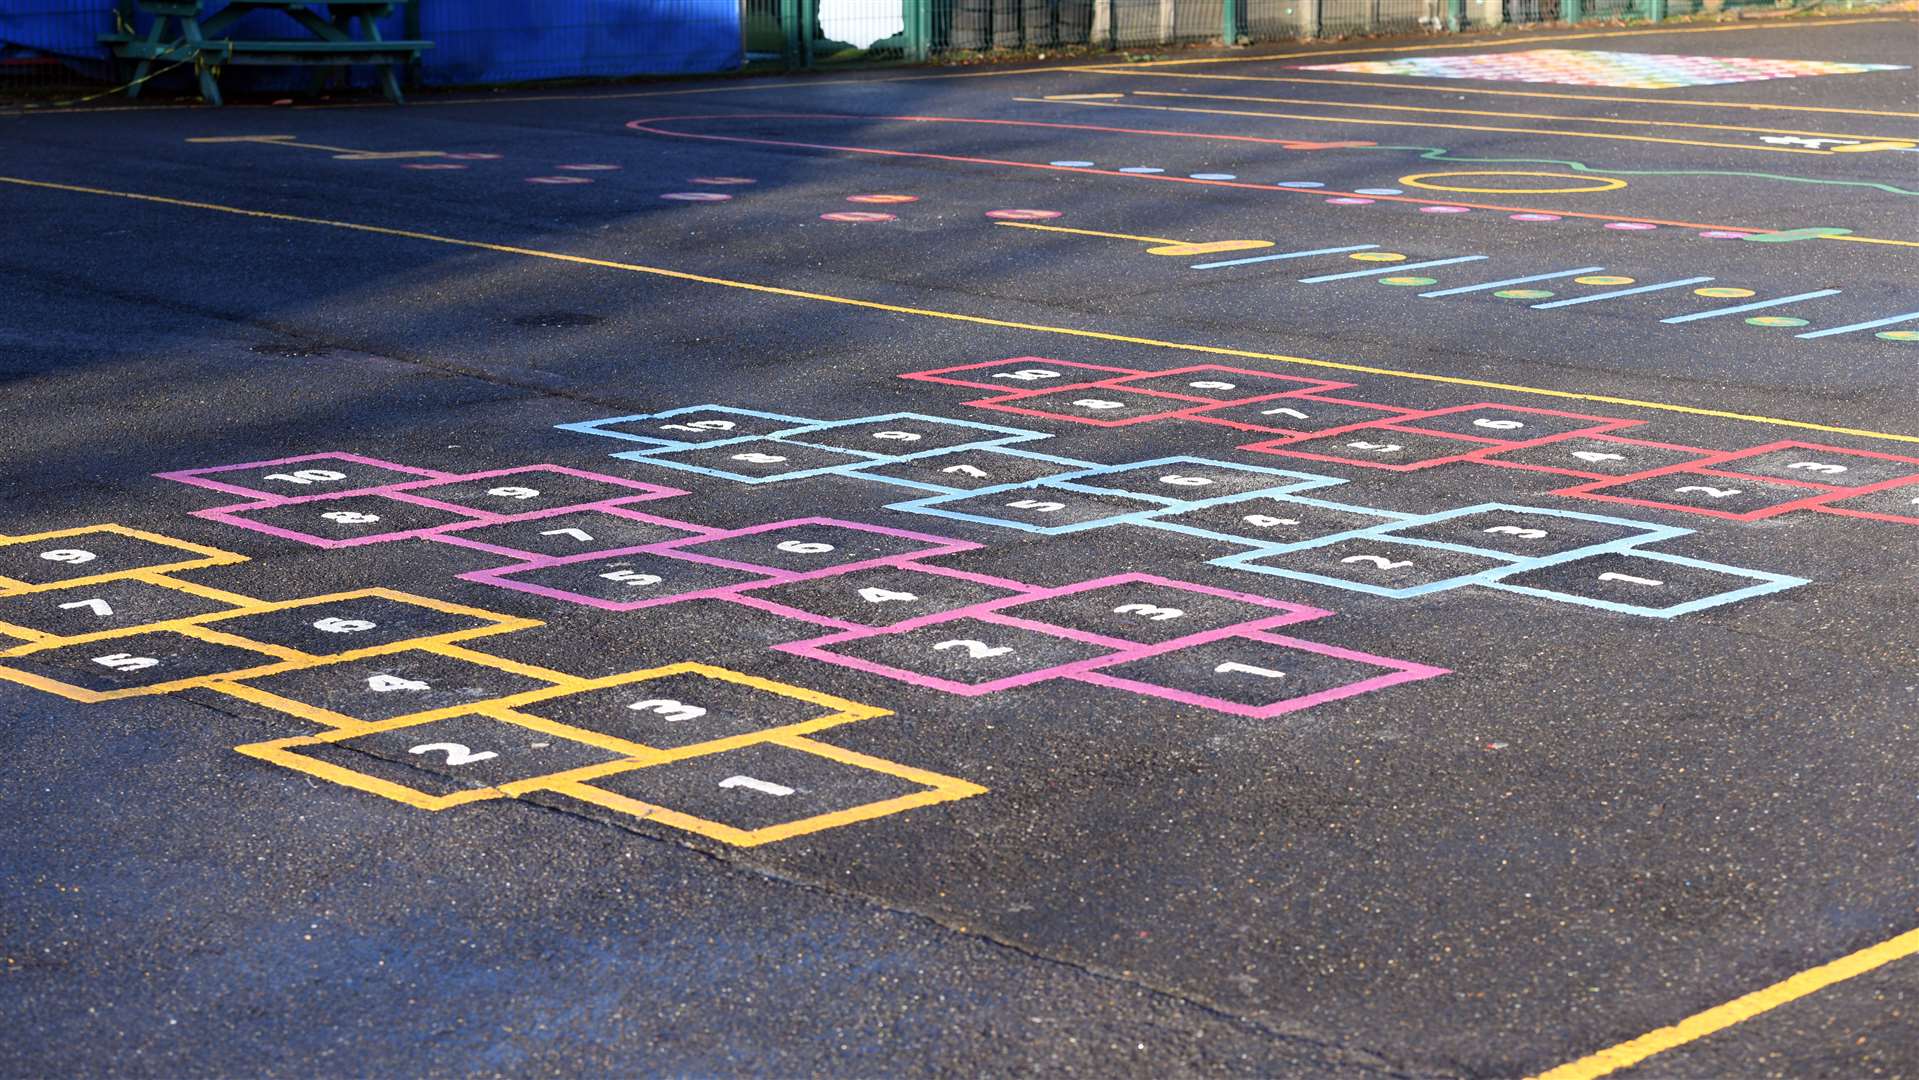 Hopscotch markings are more often found in playgrounds than on streets now